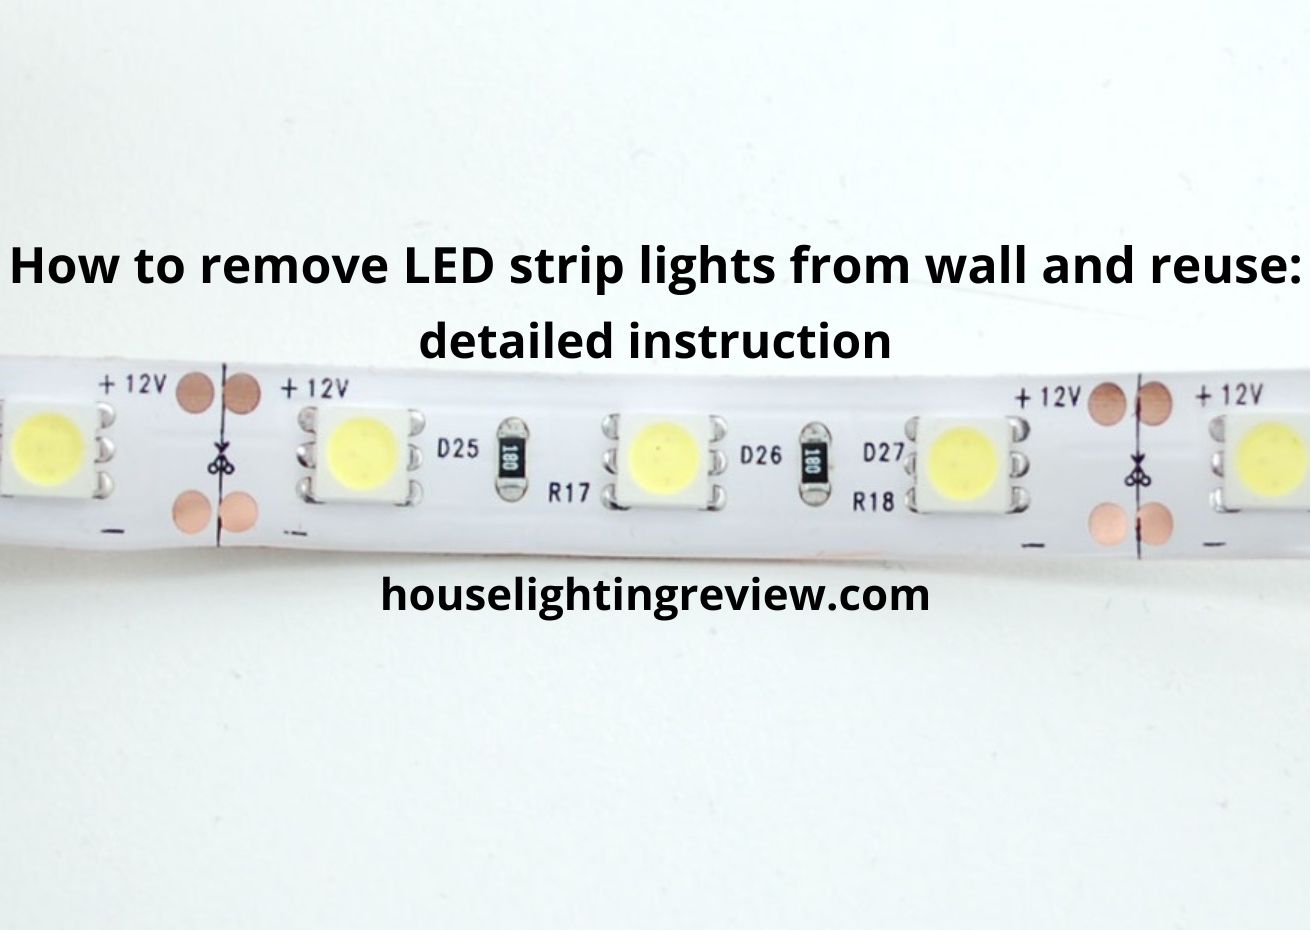 How to remove LED strip lights from wall and reuse them: the best guide